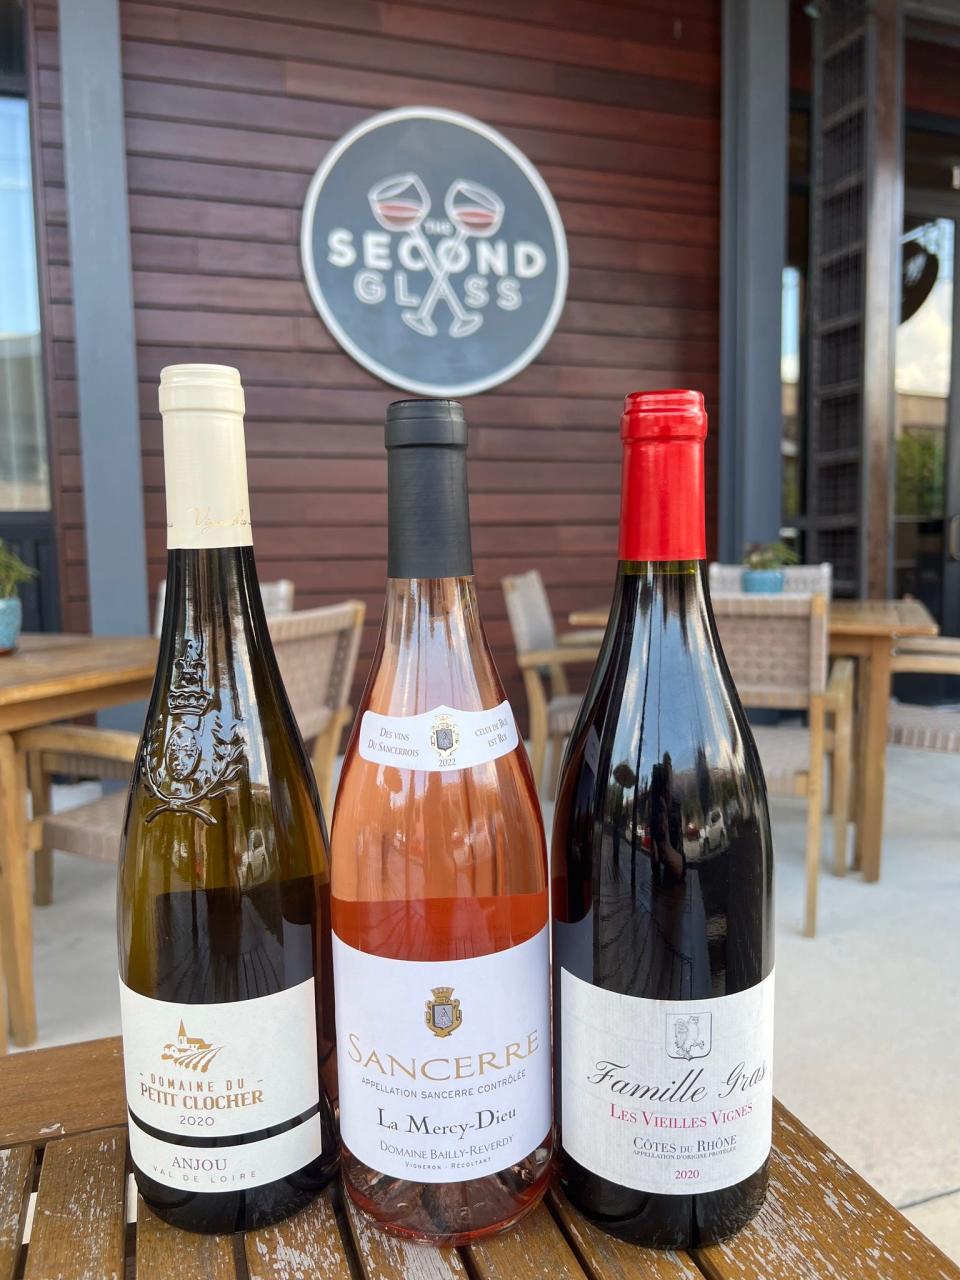 The Second Glass restaurant at 1540 S. 2nd St., Wilmington, N.C. is offering a French wine flight in honor of Bastille Day, July 14, 2023.